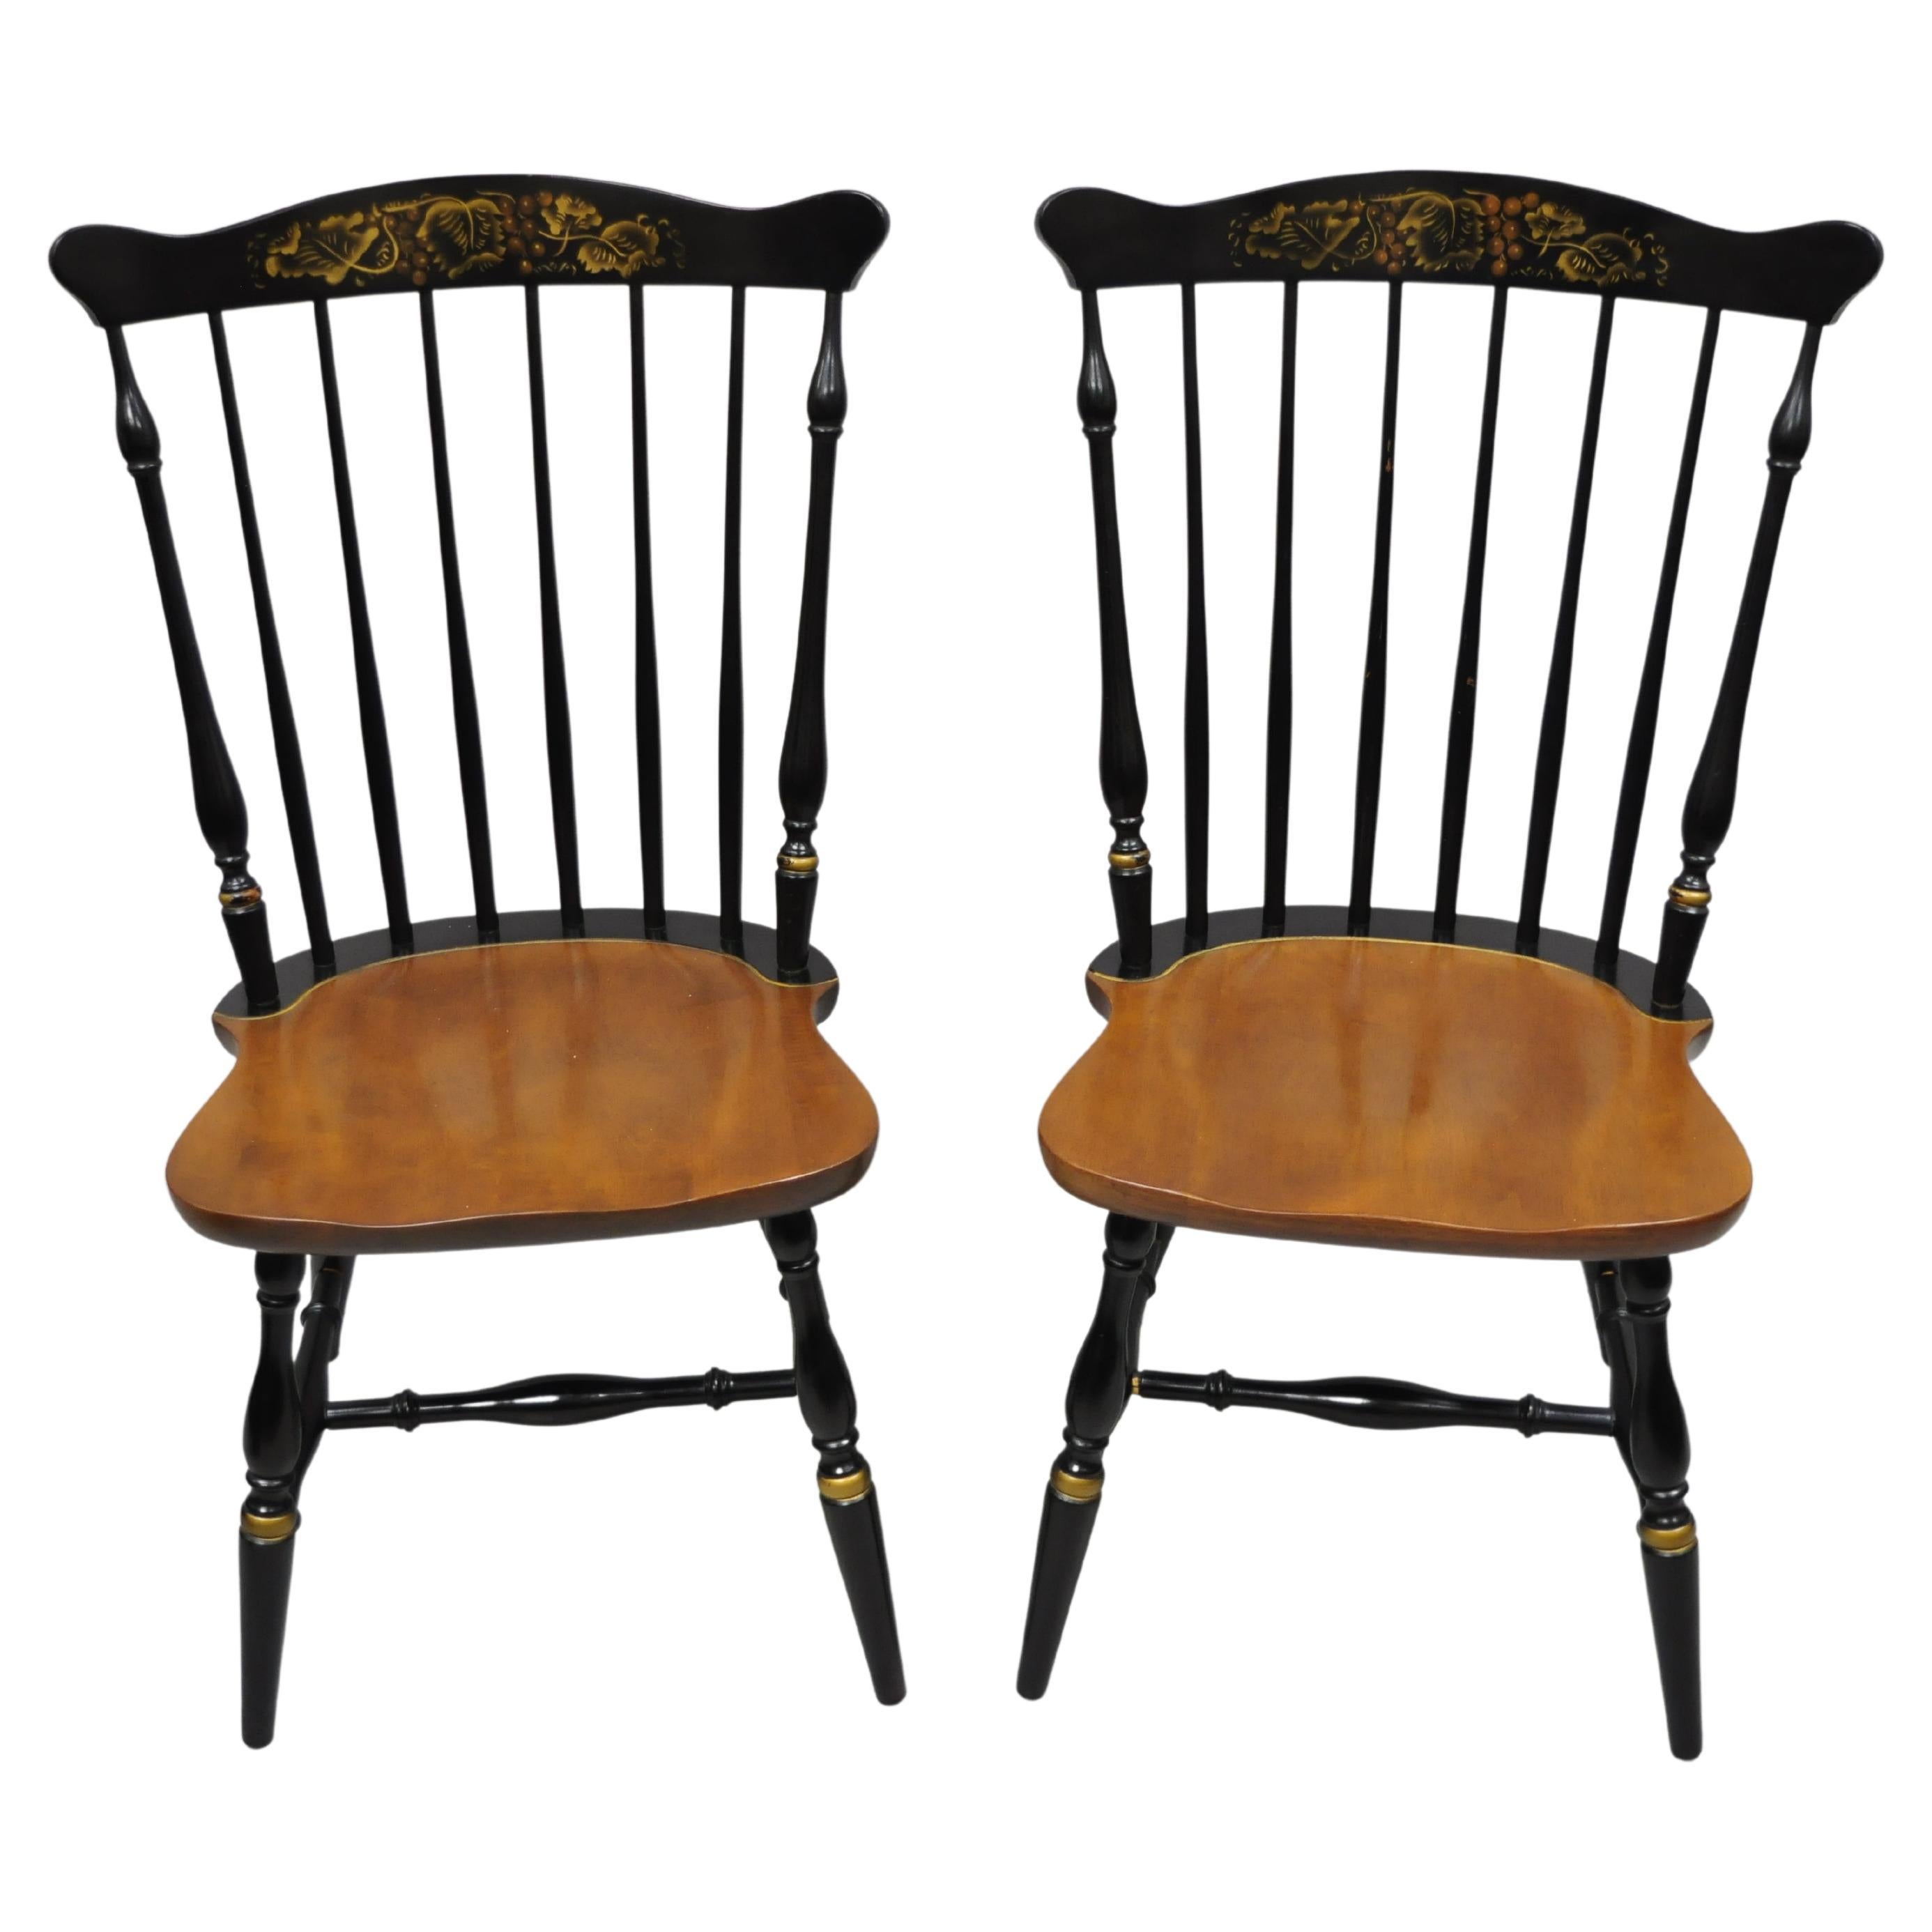 L. Hitchcock Stenciled Harvest Painted Maple Windsor Dining Chairs, a Pair